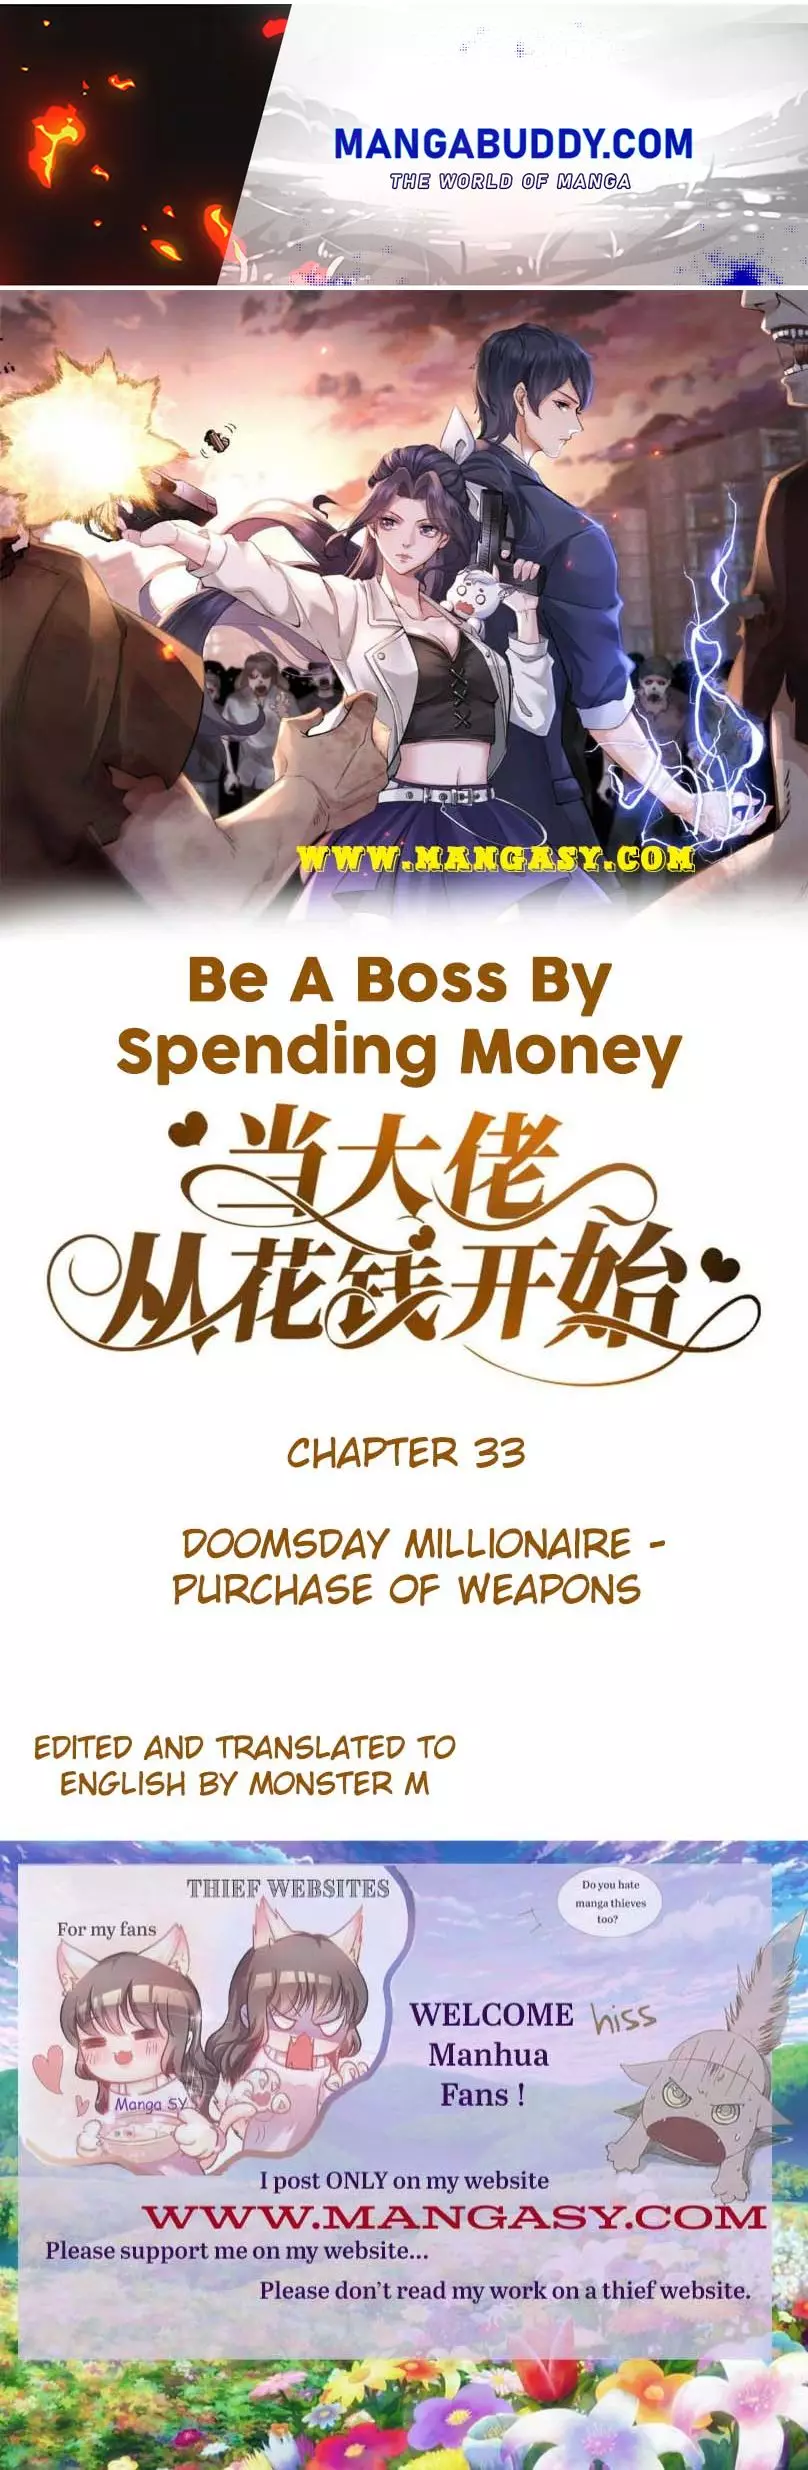 Becoming A Big Boss Starts With Spending Money - 33 page 1-82c2d225